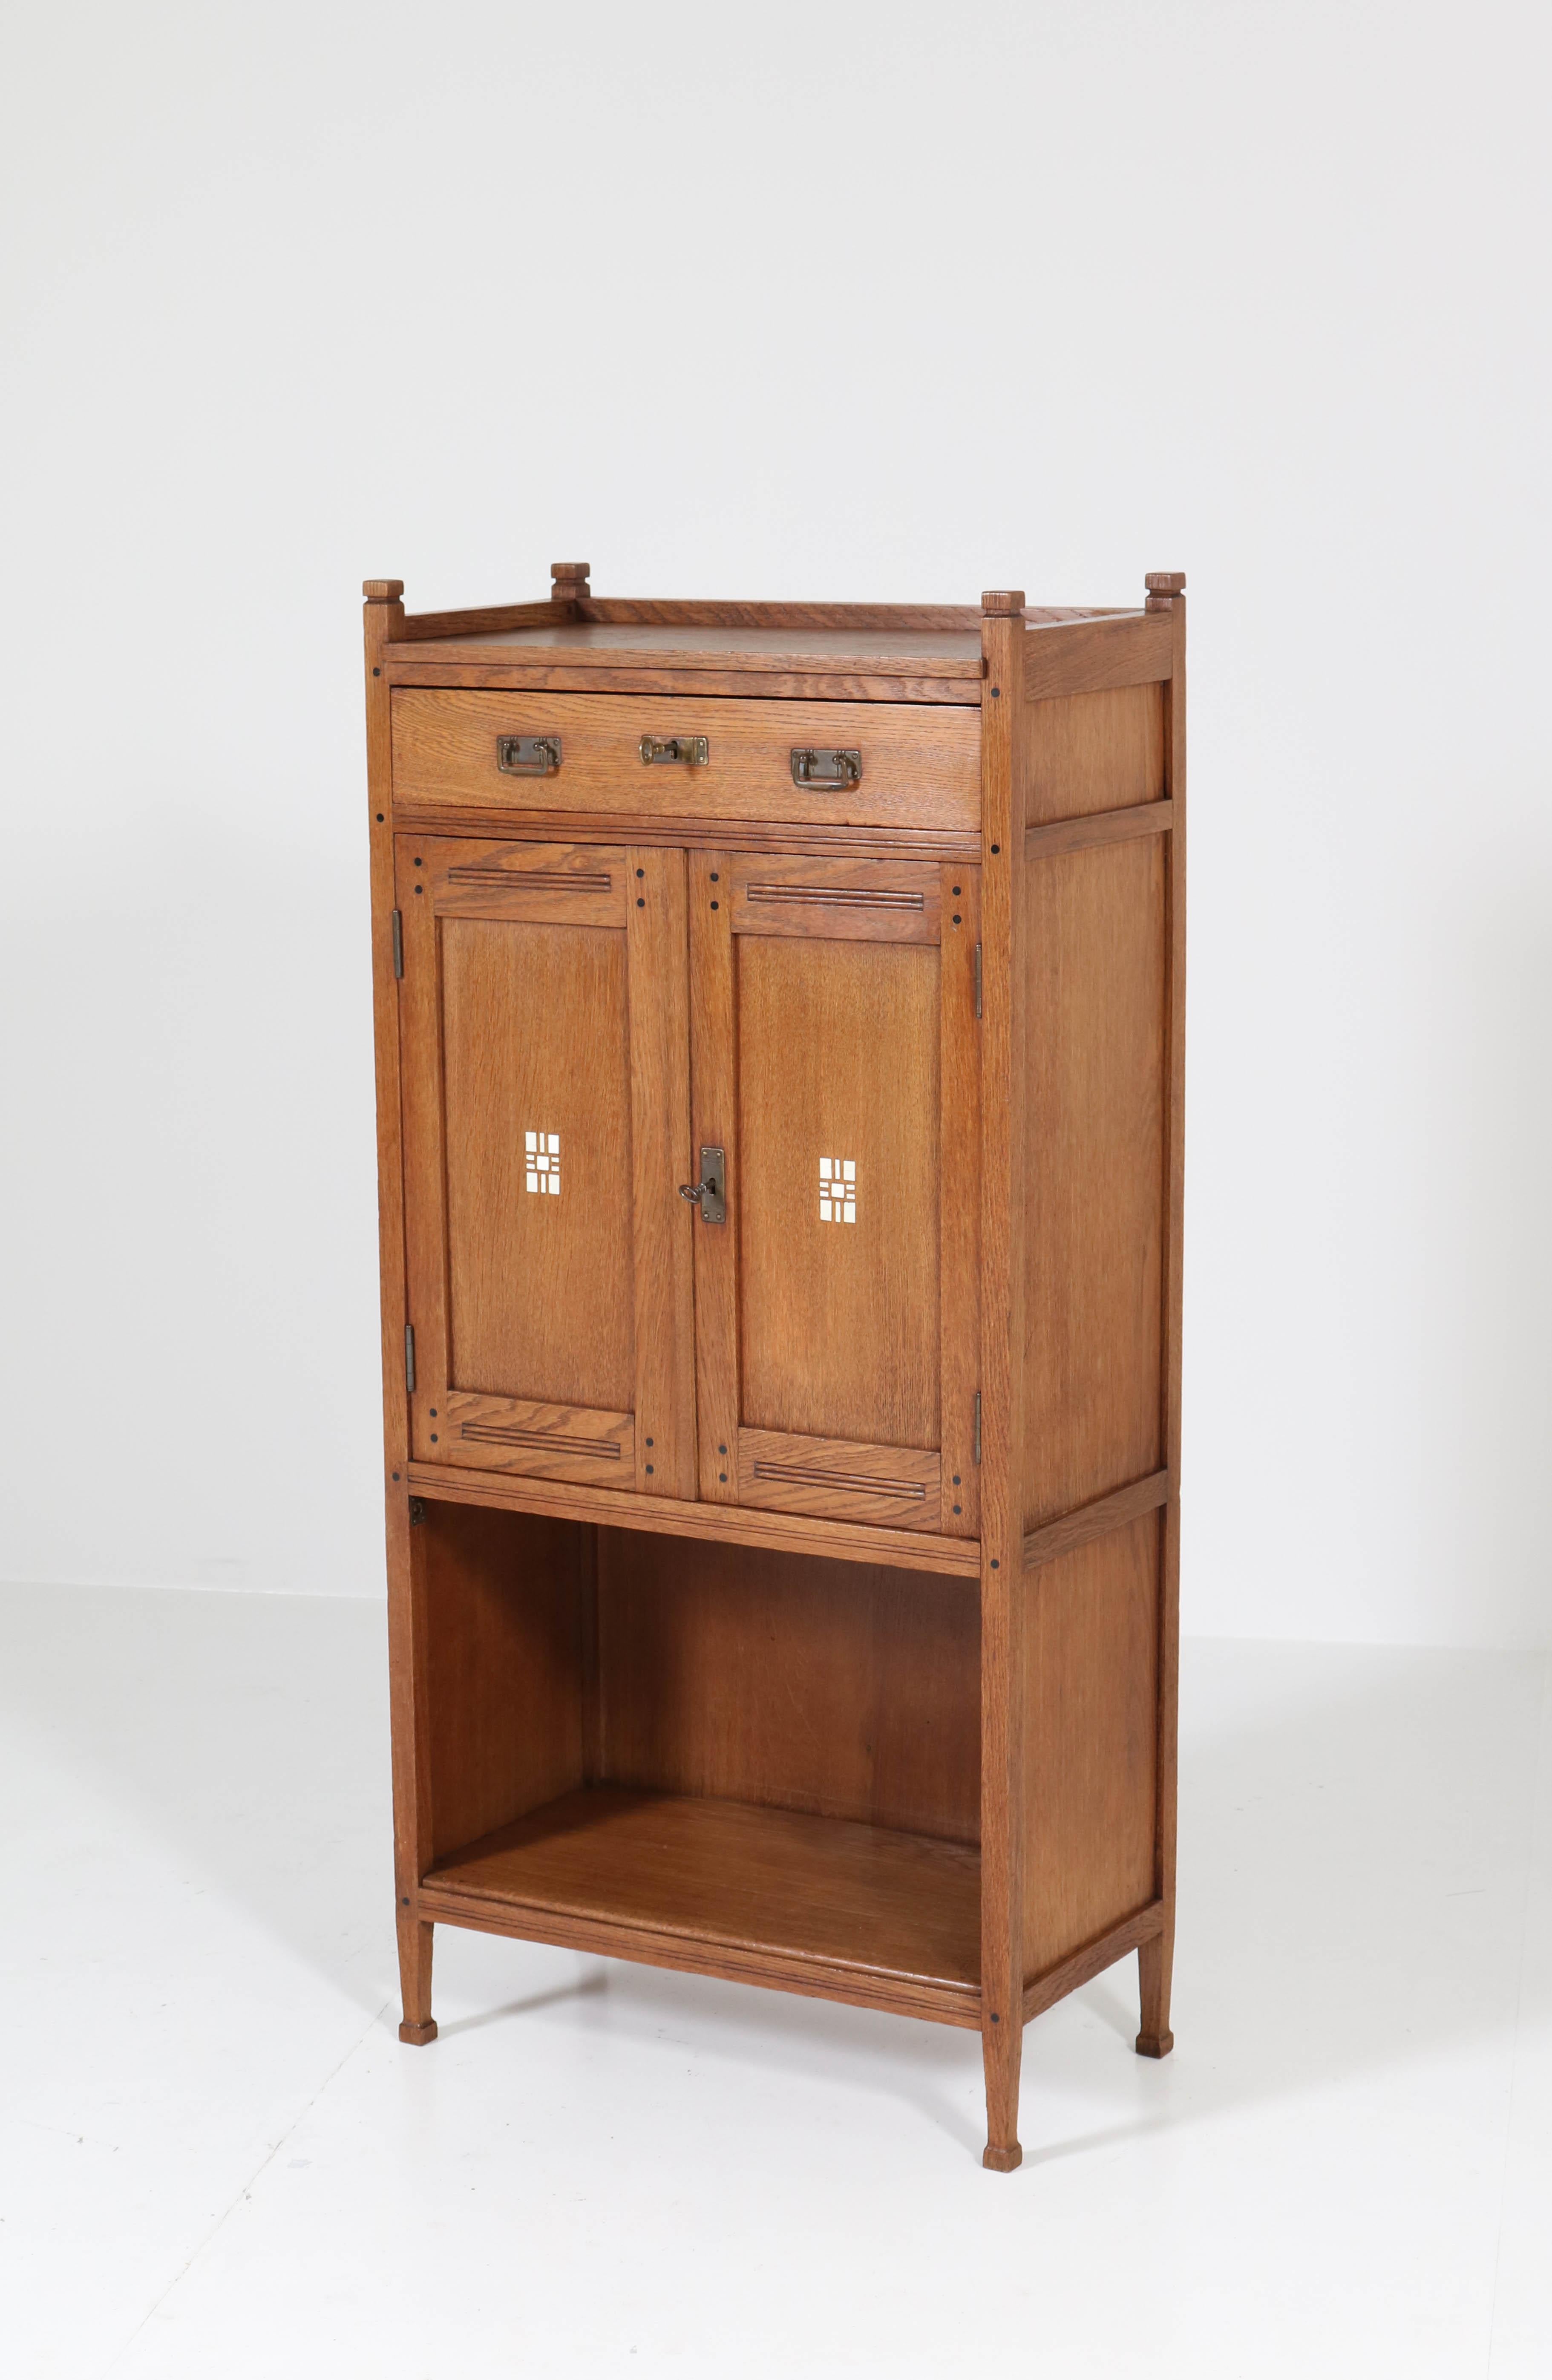 Wonderful and rare Art Nouveau Arts & Crafts cabinet.
Attributed to Karel Sluyterman for Onder den Sint Maarten.
Striking Dutch design from the 1900s.
Solid oak with original brass handles and original inlay.
In very good condition with minor